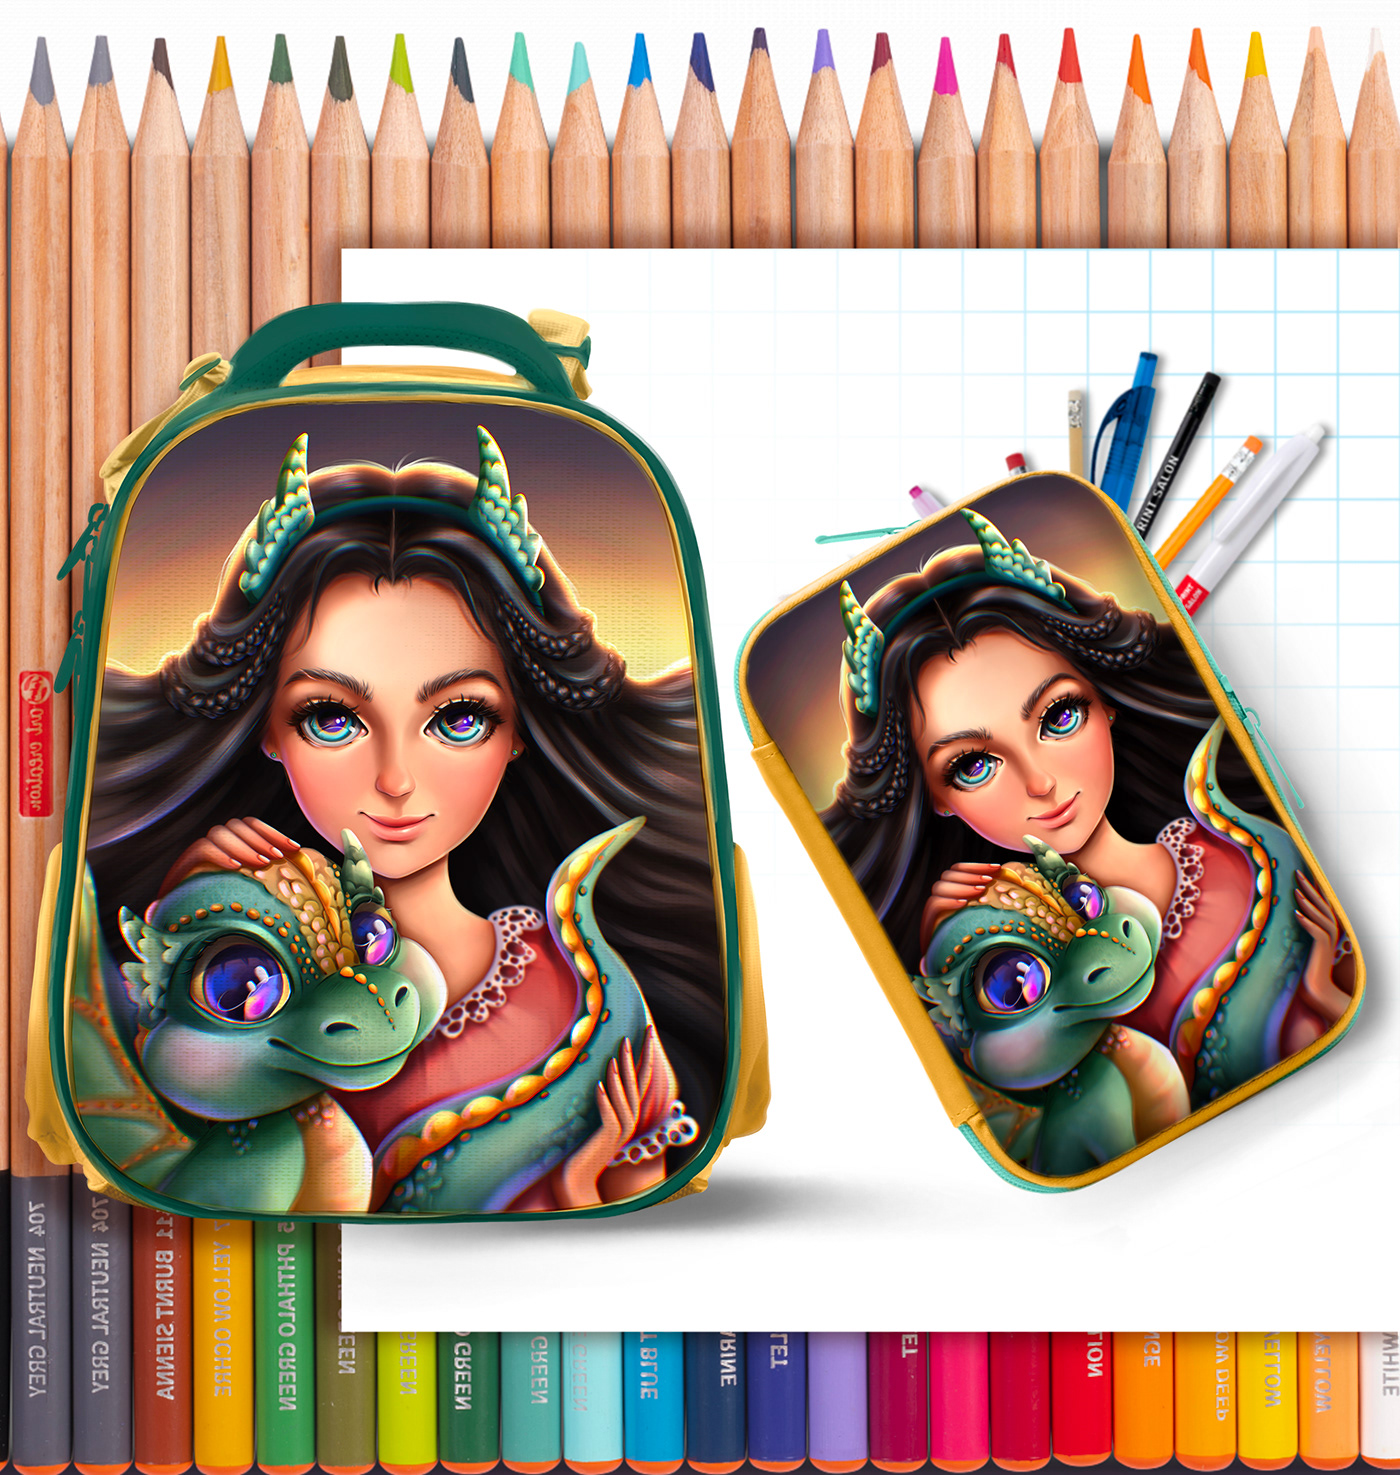 design concept design School Project cute illustration Character design  Character girls cute character pencil cases school backpacks